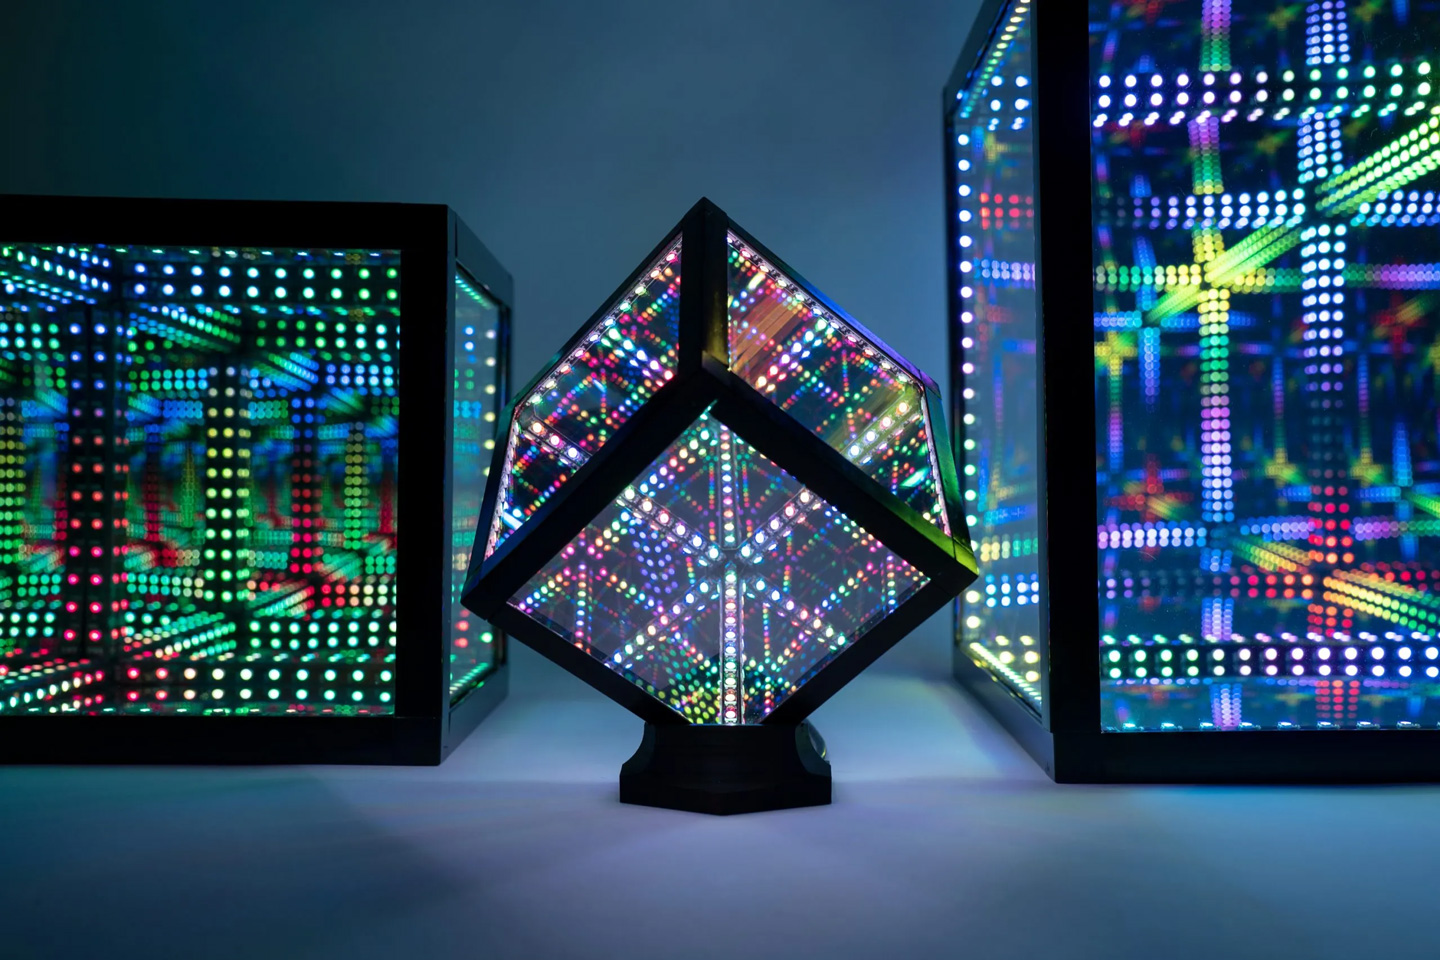 #This infinity-mirror LED cube has to be the most incredible tabletop accessory for gaming nerds